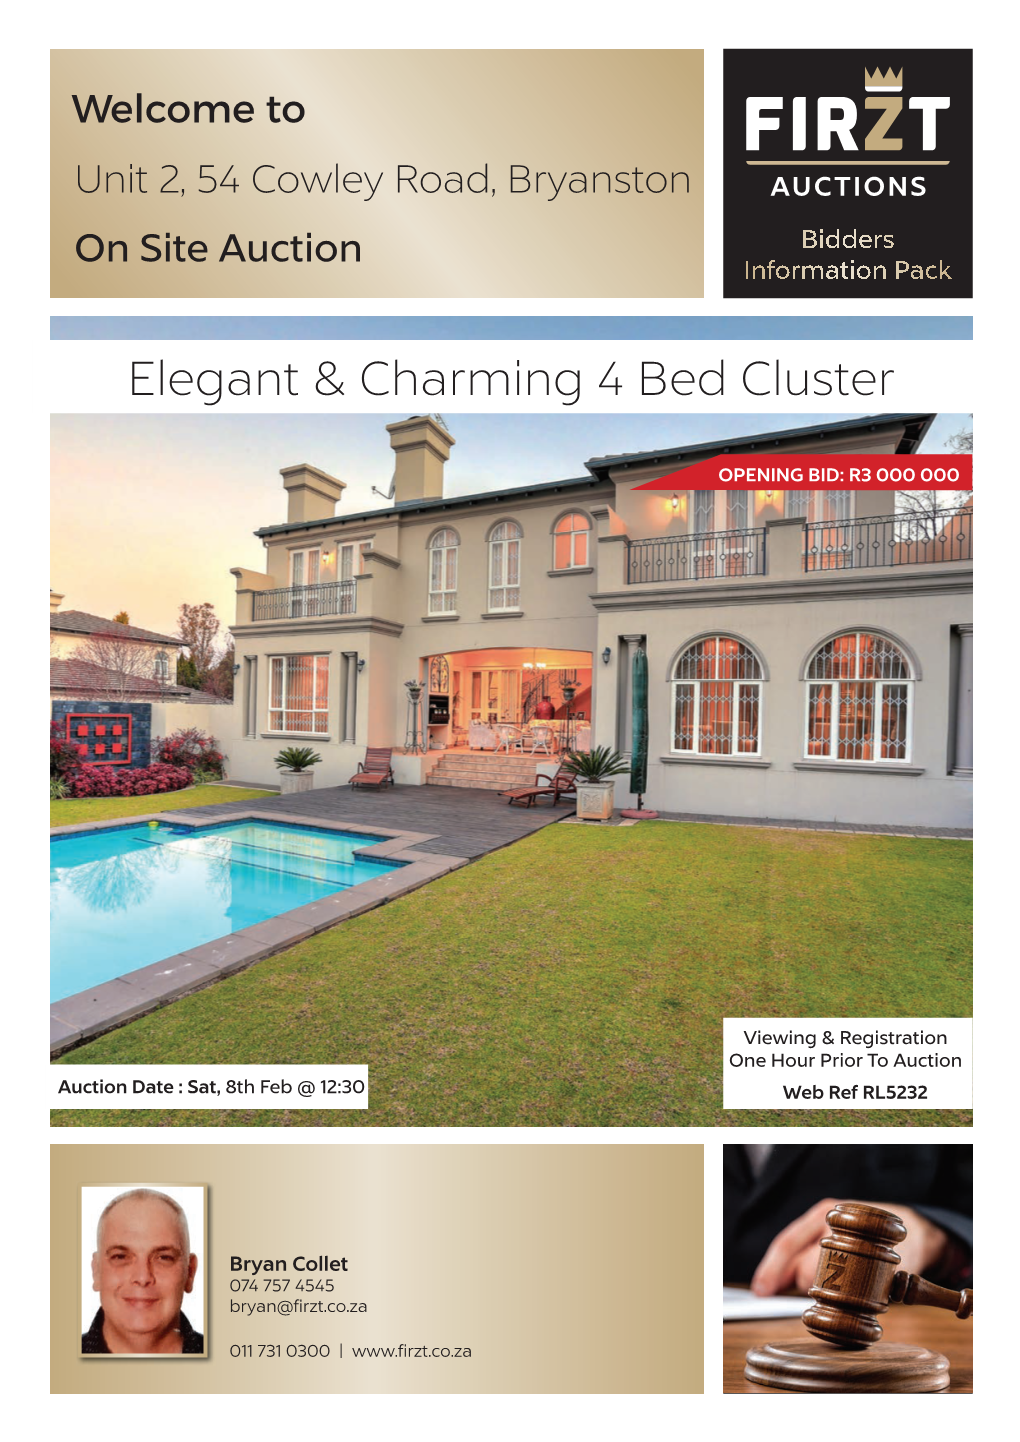 Unit 2, 54 Cowley Road, Bryanston on Site Auction Bidders Information Pack